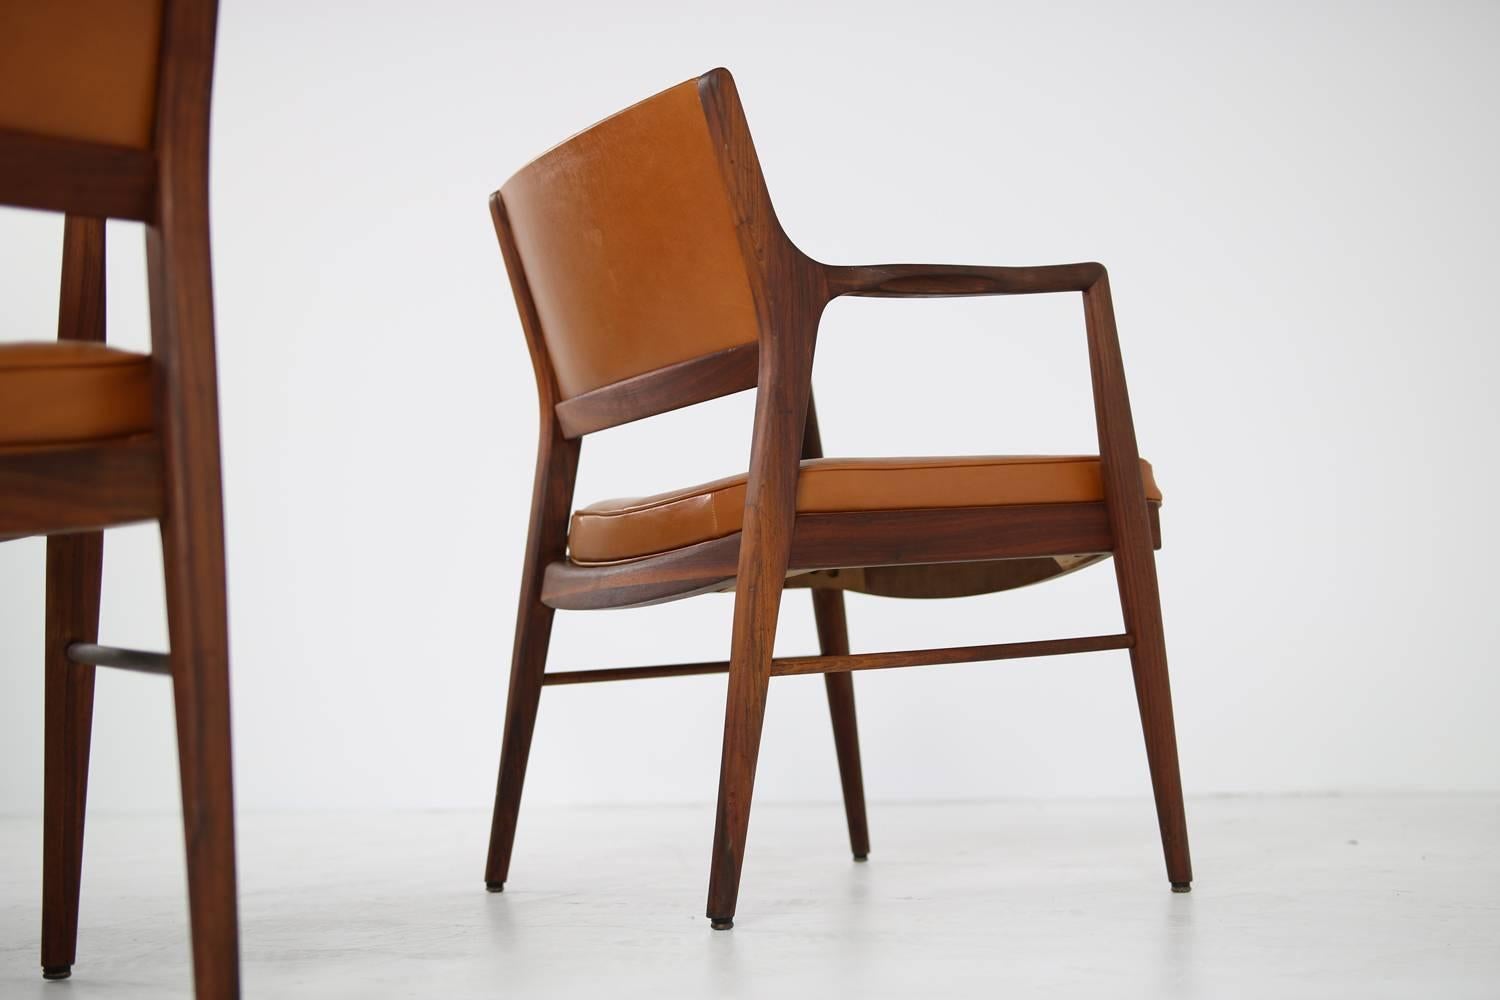 1960 chairs